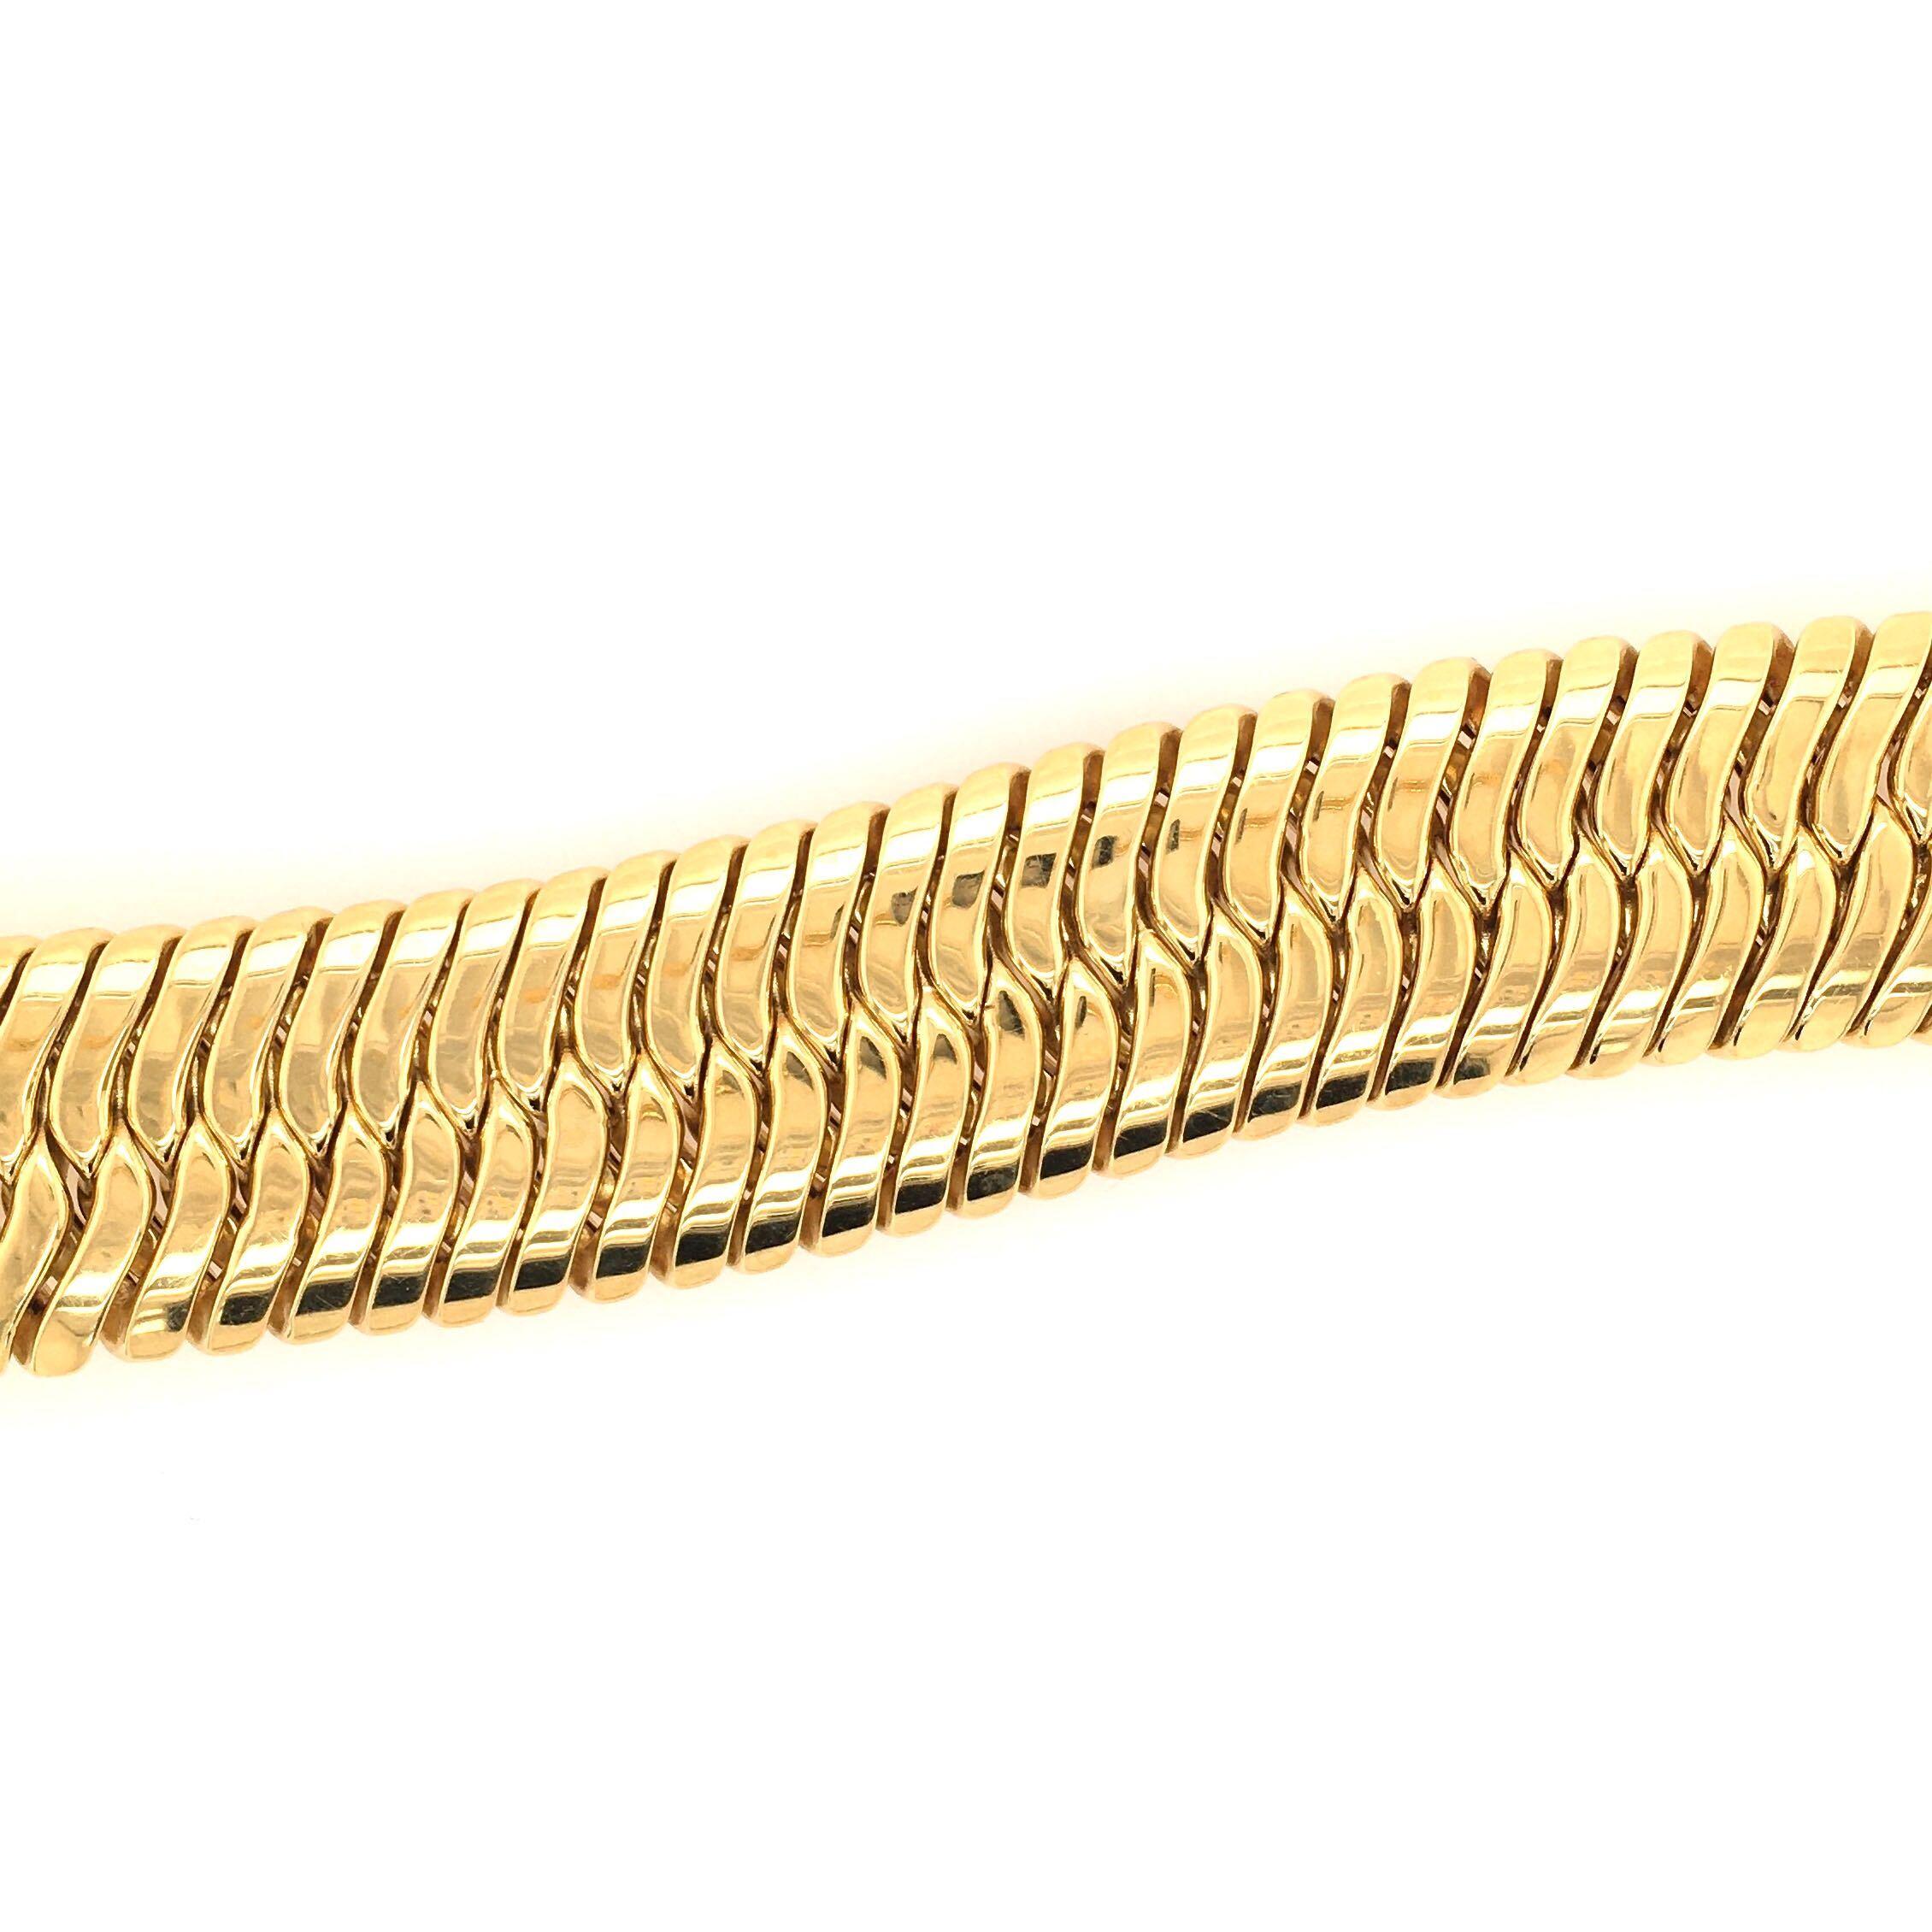 An 18 karat yellow gold bracelet. Italian. Circa 1980.    Articulated bracelet of woven braided links.   Length is approximately 8 inches. Gross weight is approximately 79 grams. Makers mark CB.